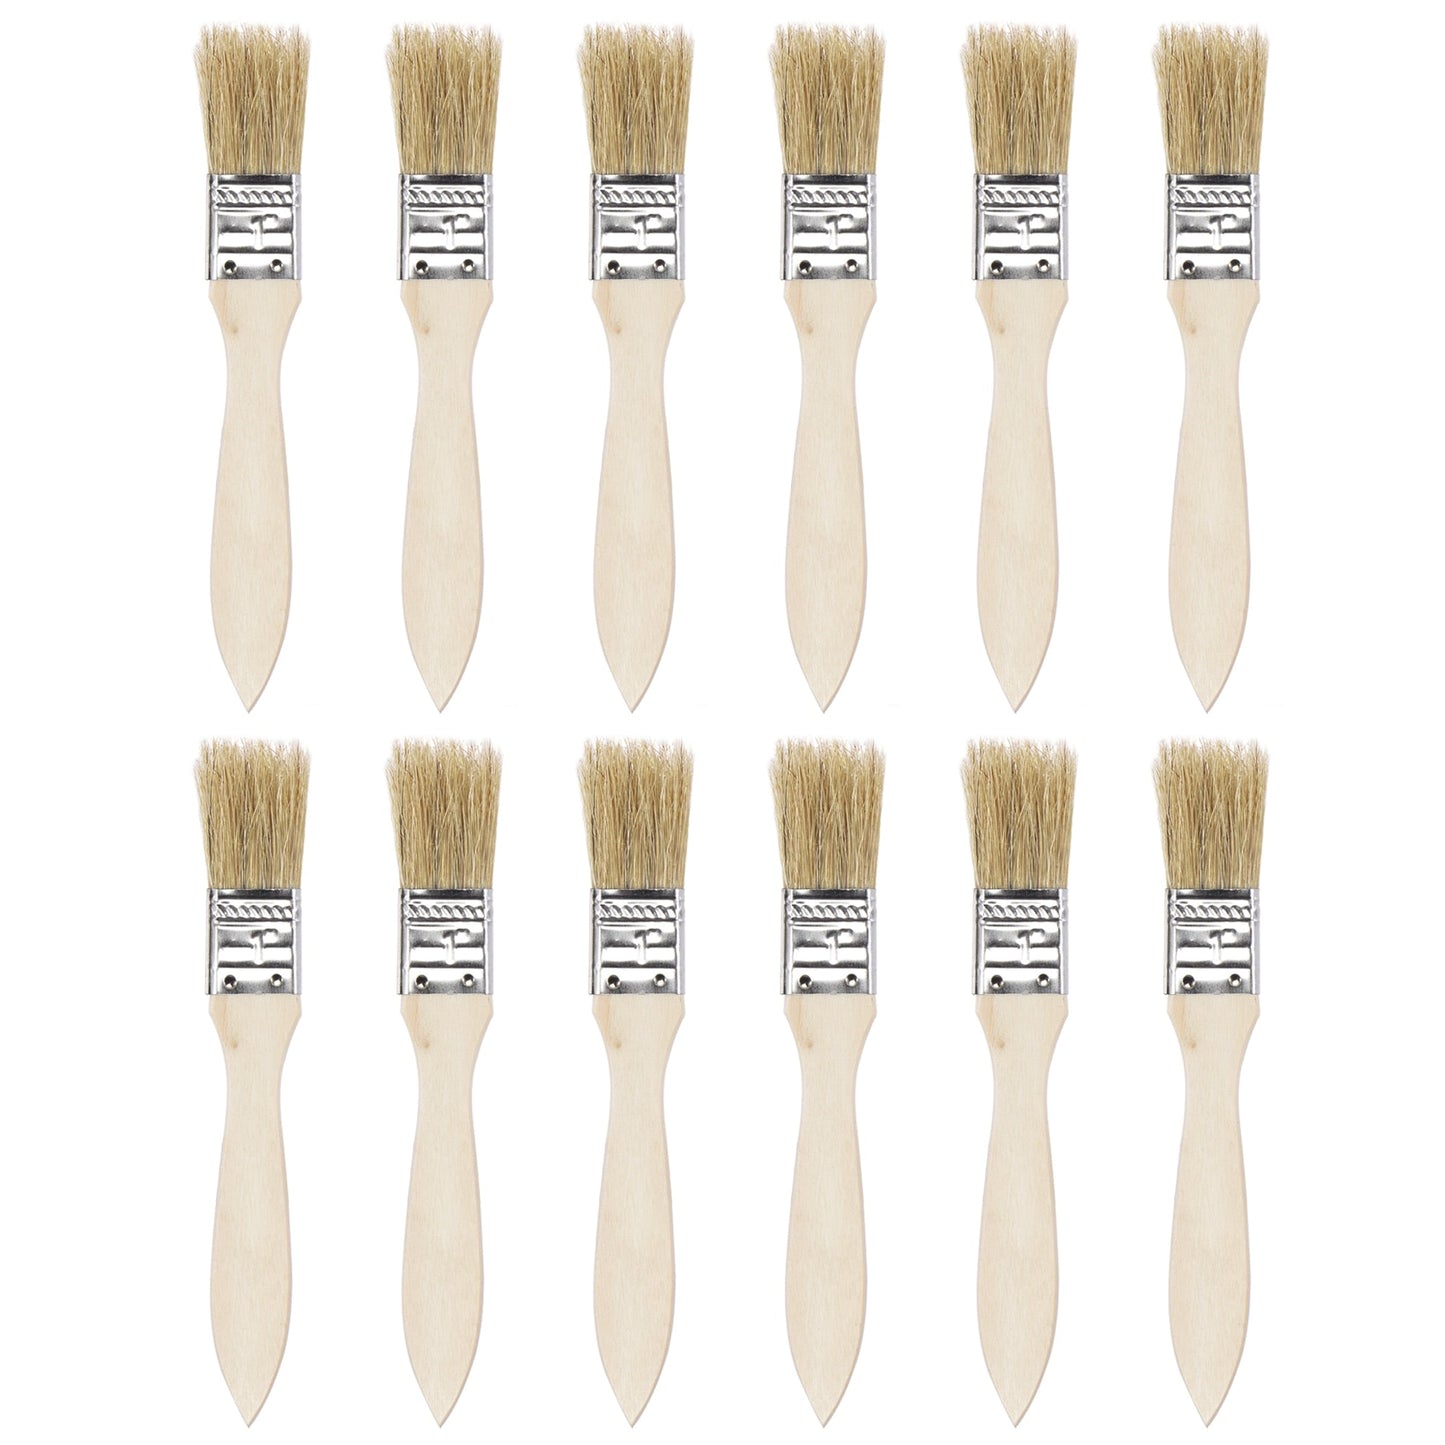 Uxcell 12 Pcs 1 Inch Paint Brush